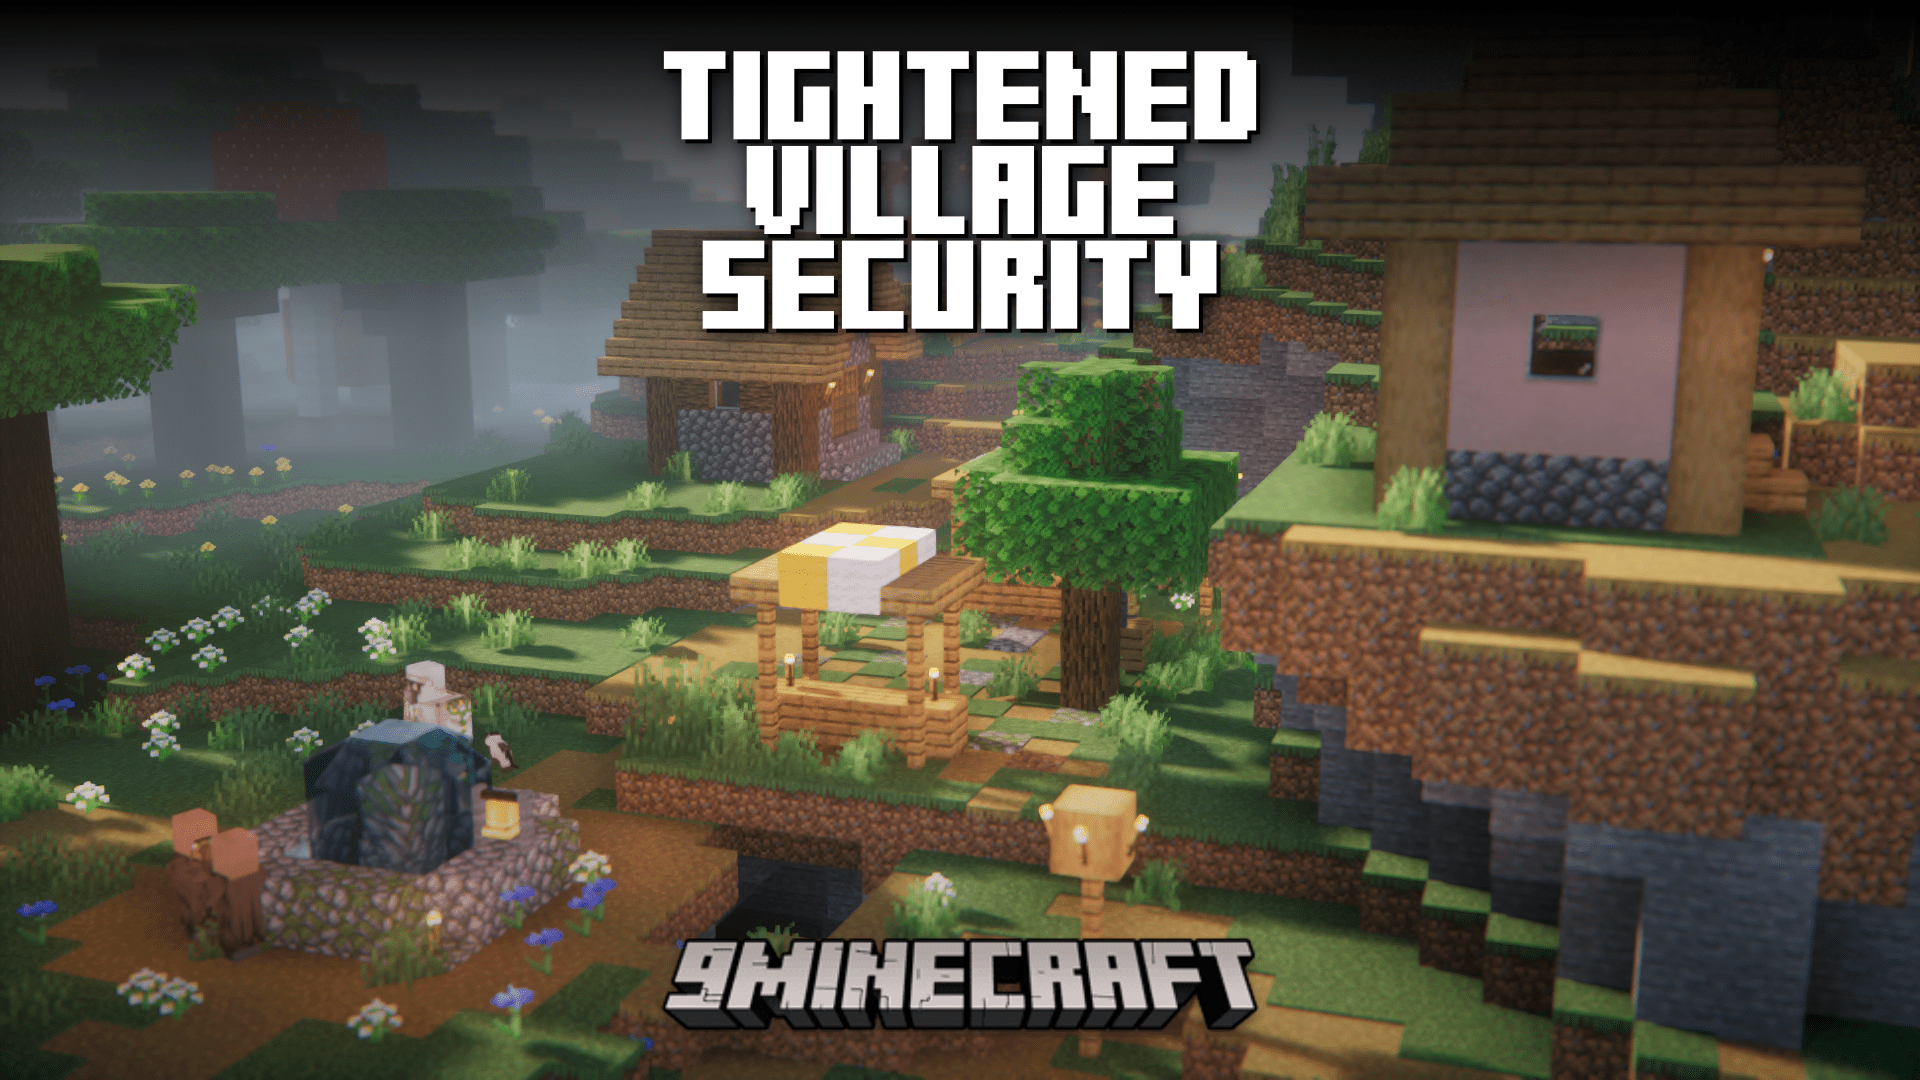 Tightened Village Security Mod (1.20.1, 1.19.2) - Mistreating Villagers Come WIth Consequences 1